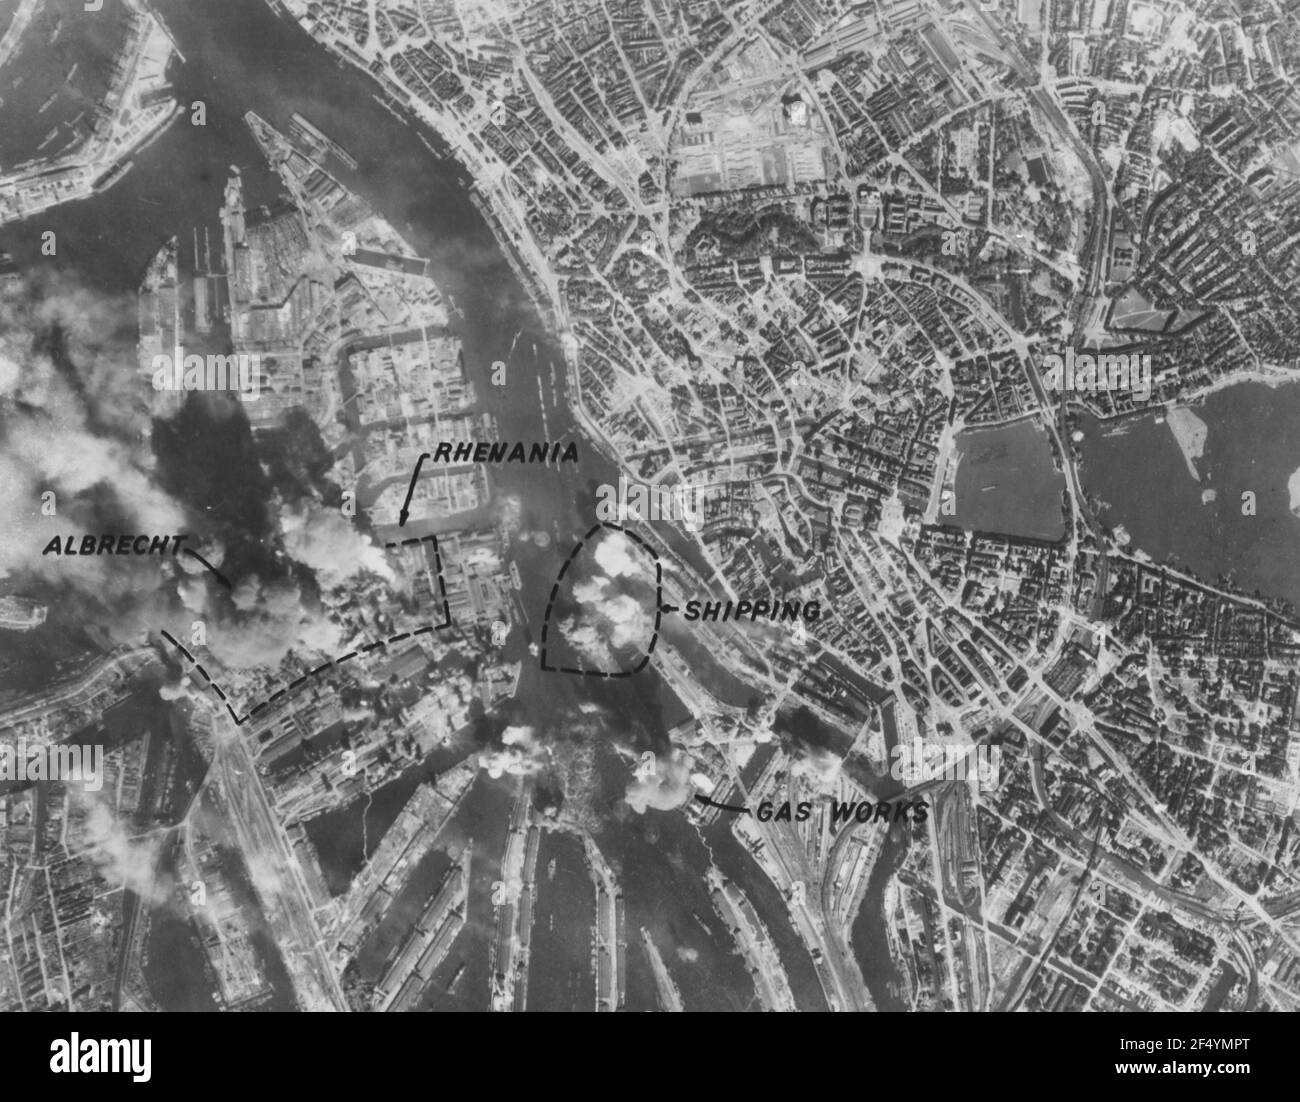 Bombing of Hamburg-Rhenania-Ossag and Abrecht plants by U.S. heavy bombers during World War II Stock Photo